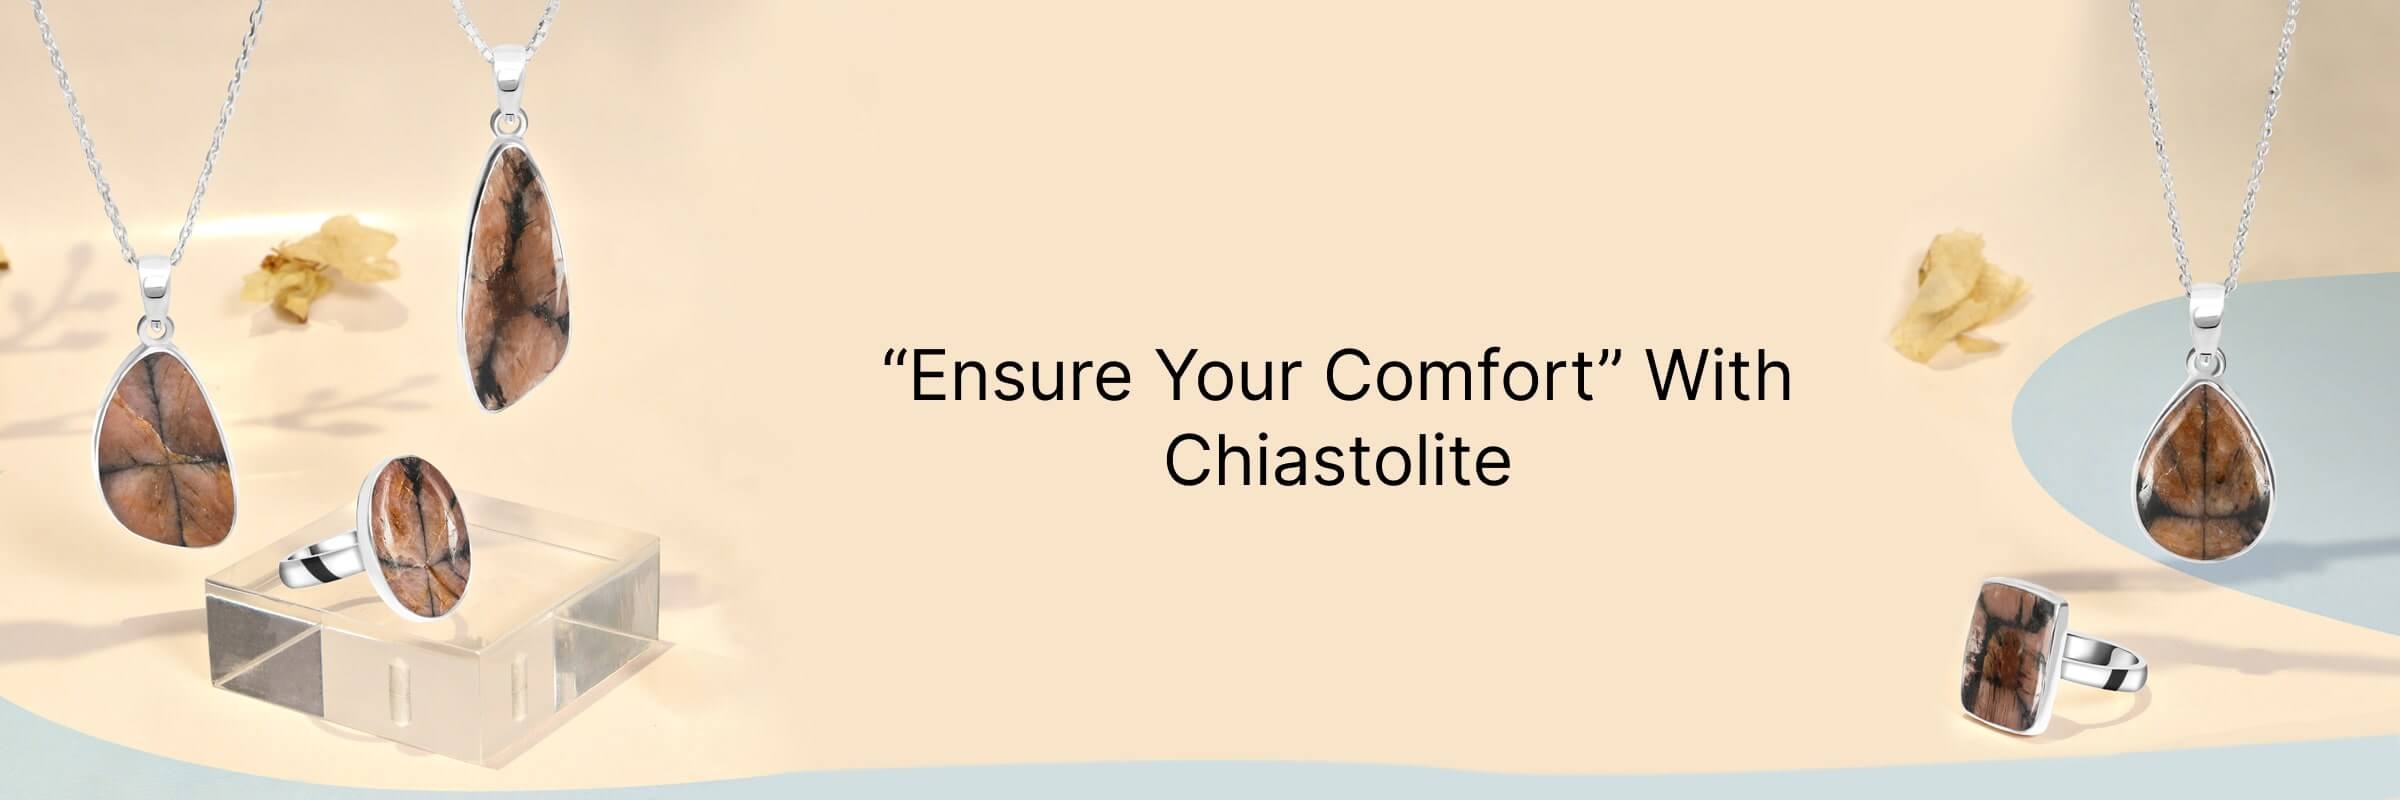 Chiastolite's Benefits for Your Physical Health